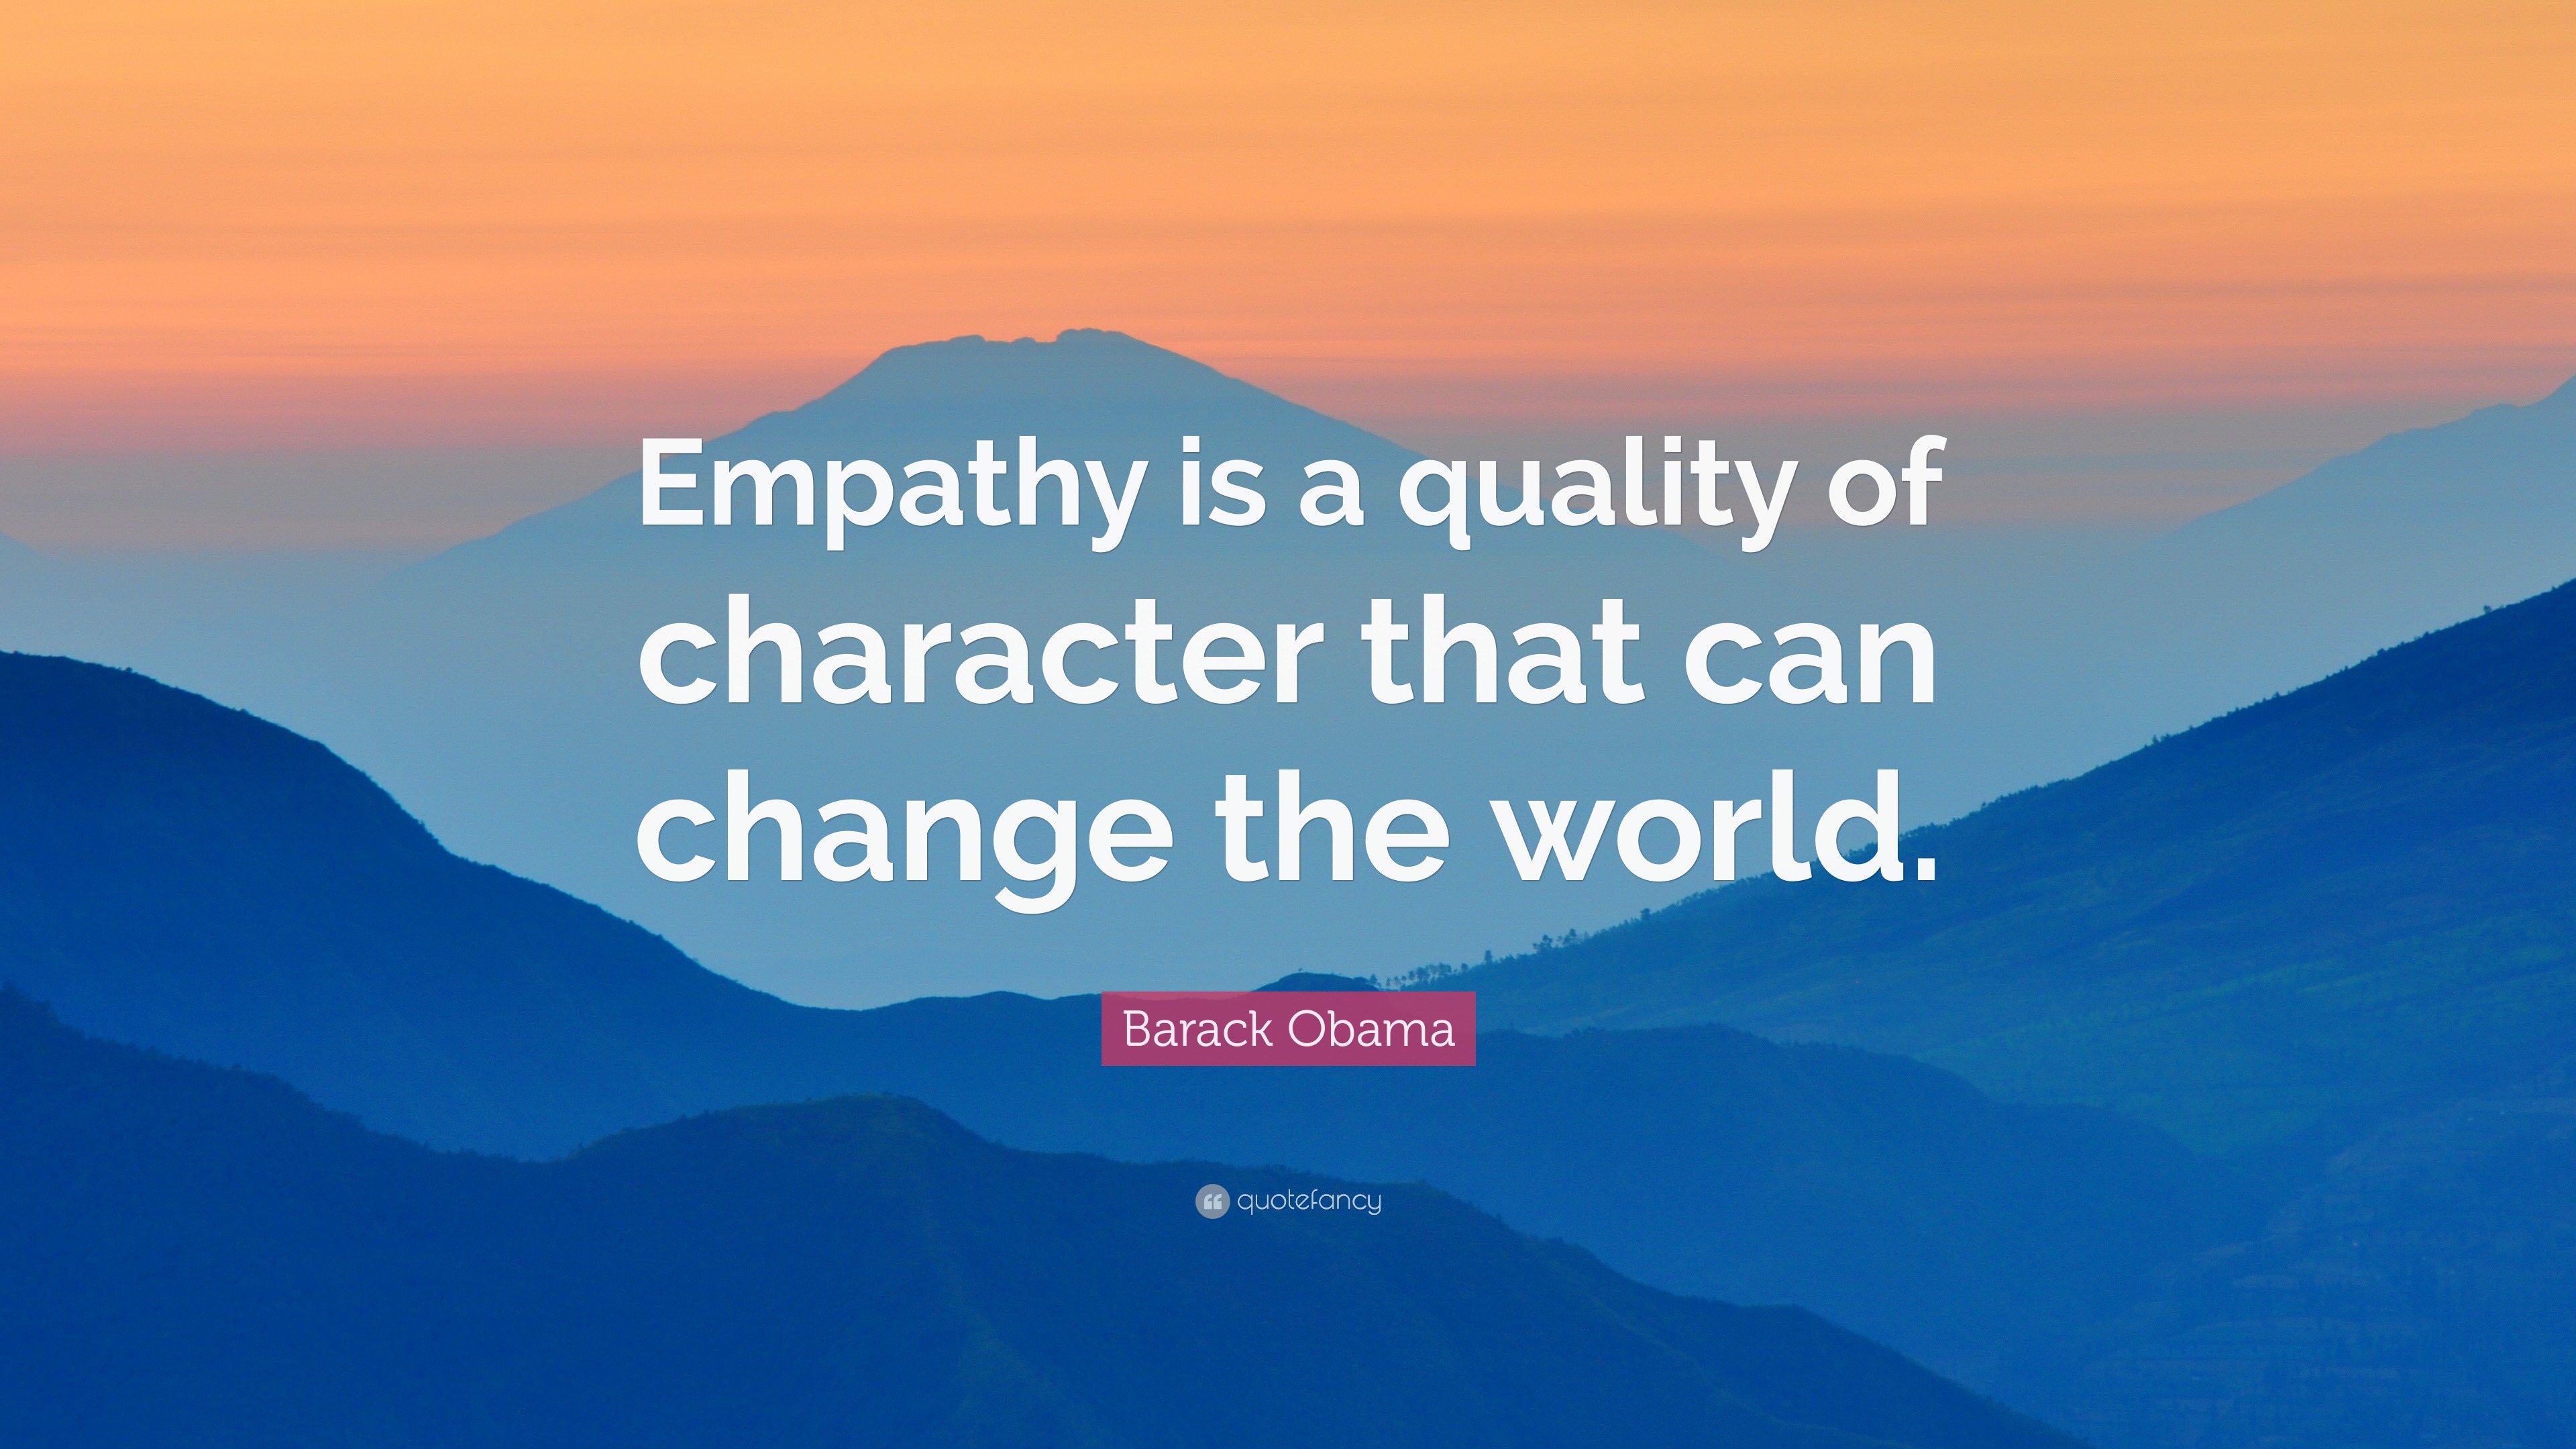 Barack Obama Quote: “Empathy is a quality of character that can change ...